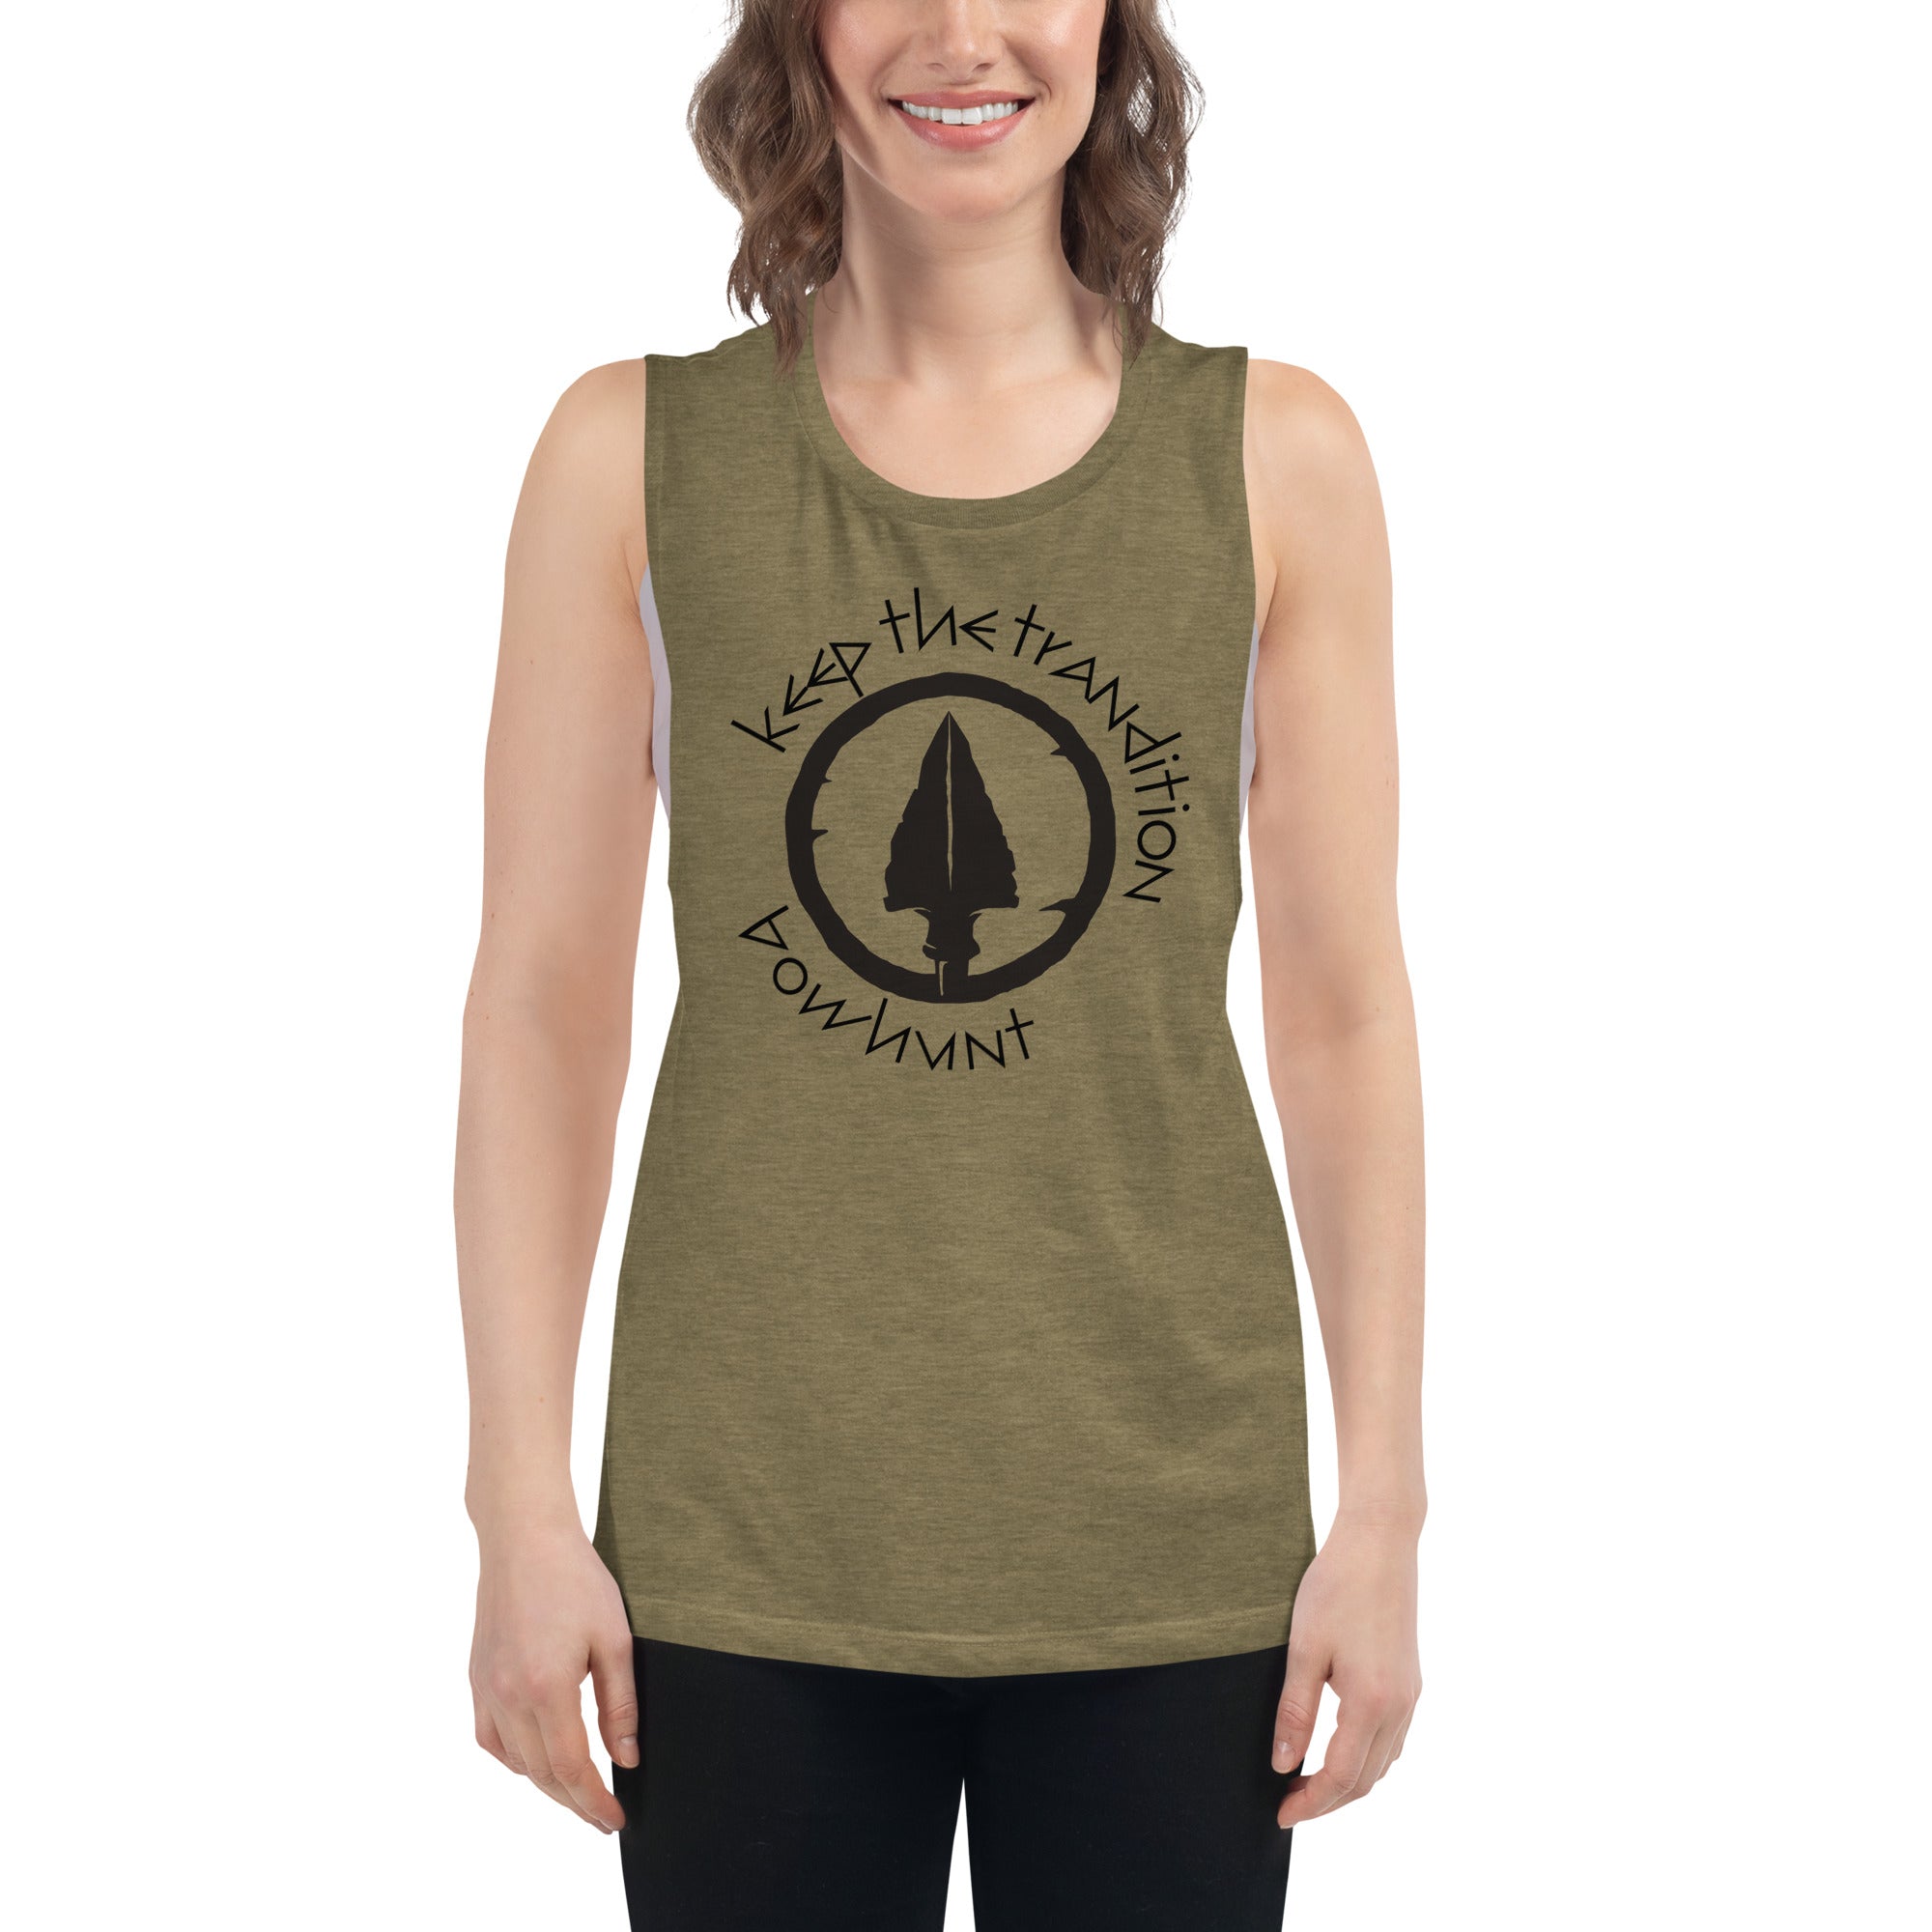 Keep The Tradition Women's Muscle Tank - Bow Hunt